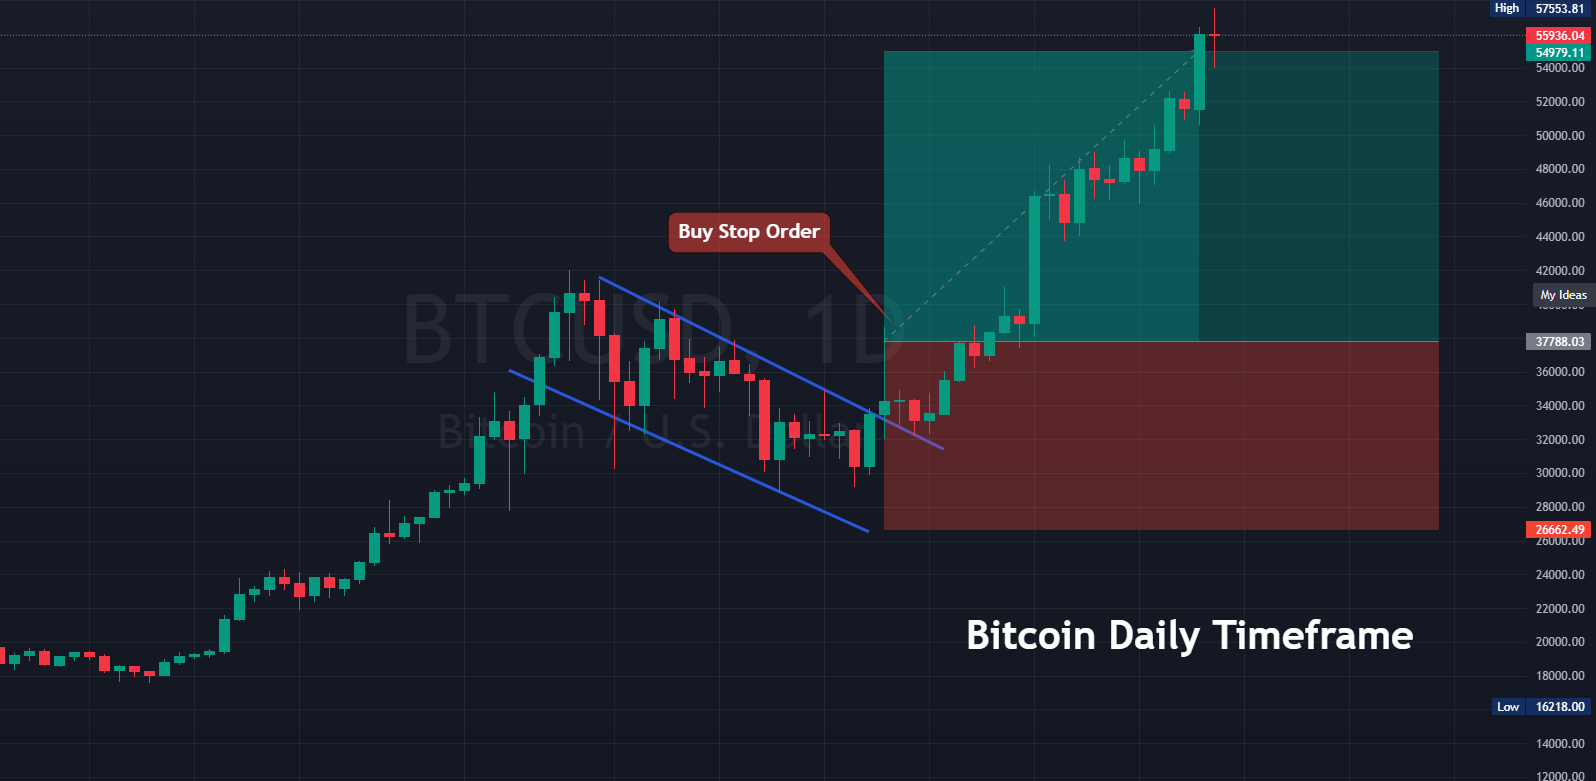 Bull Flag Breakout and Buy Stop Order